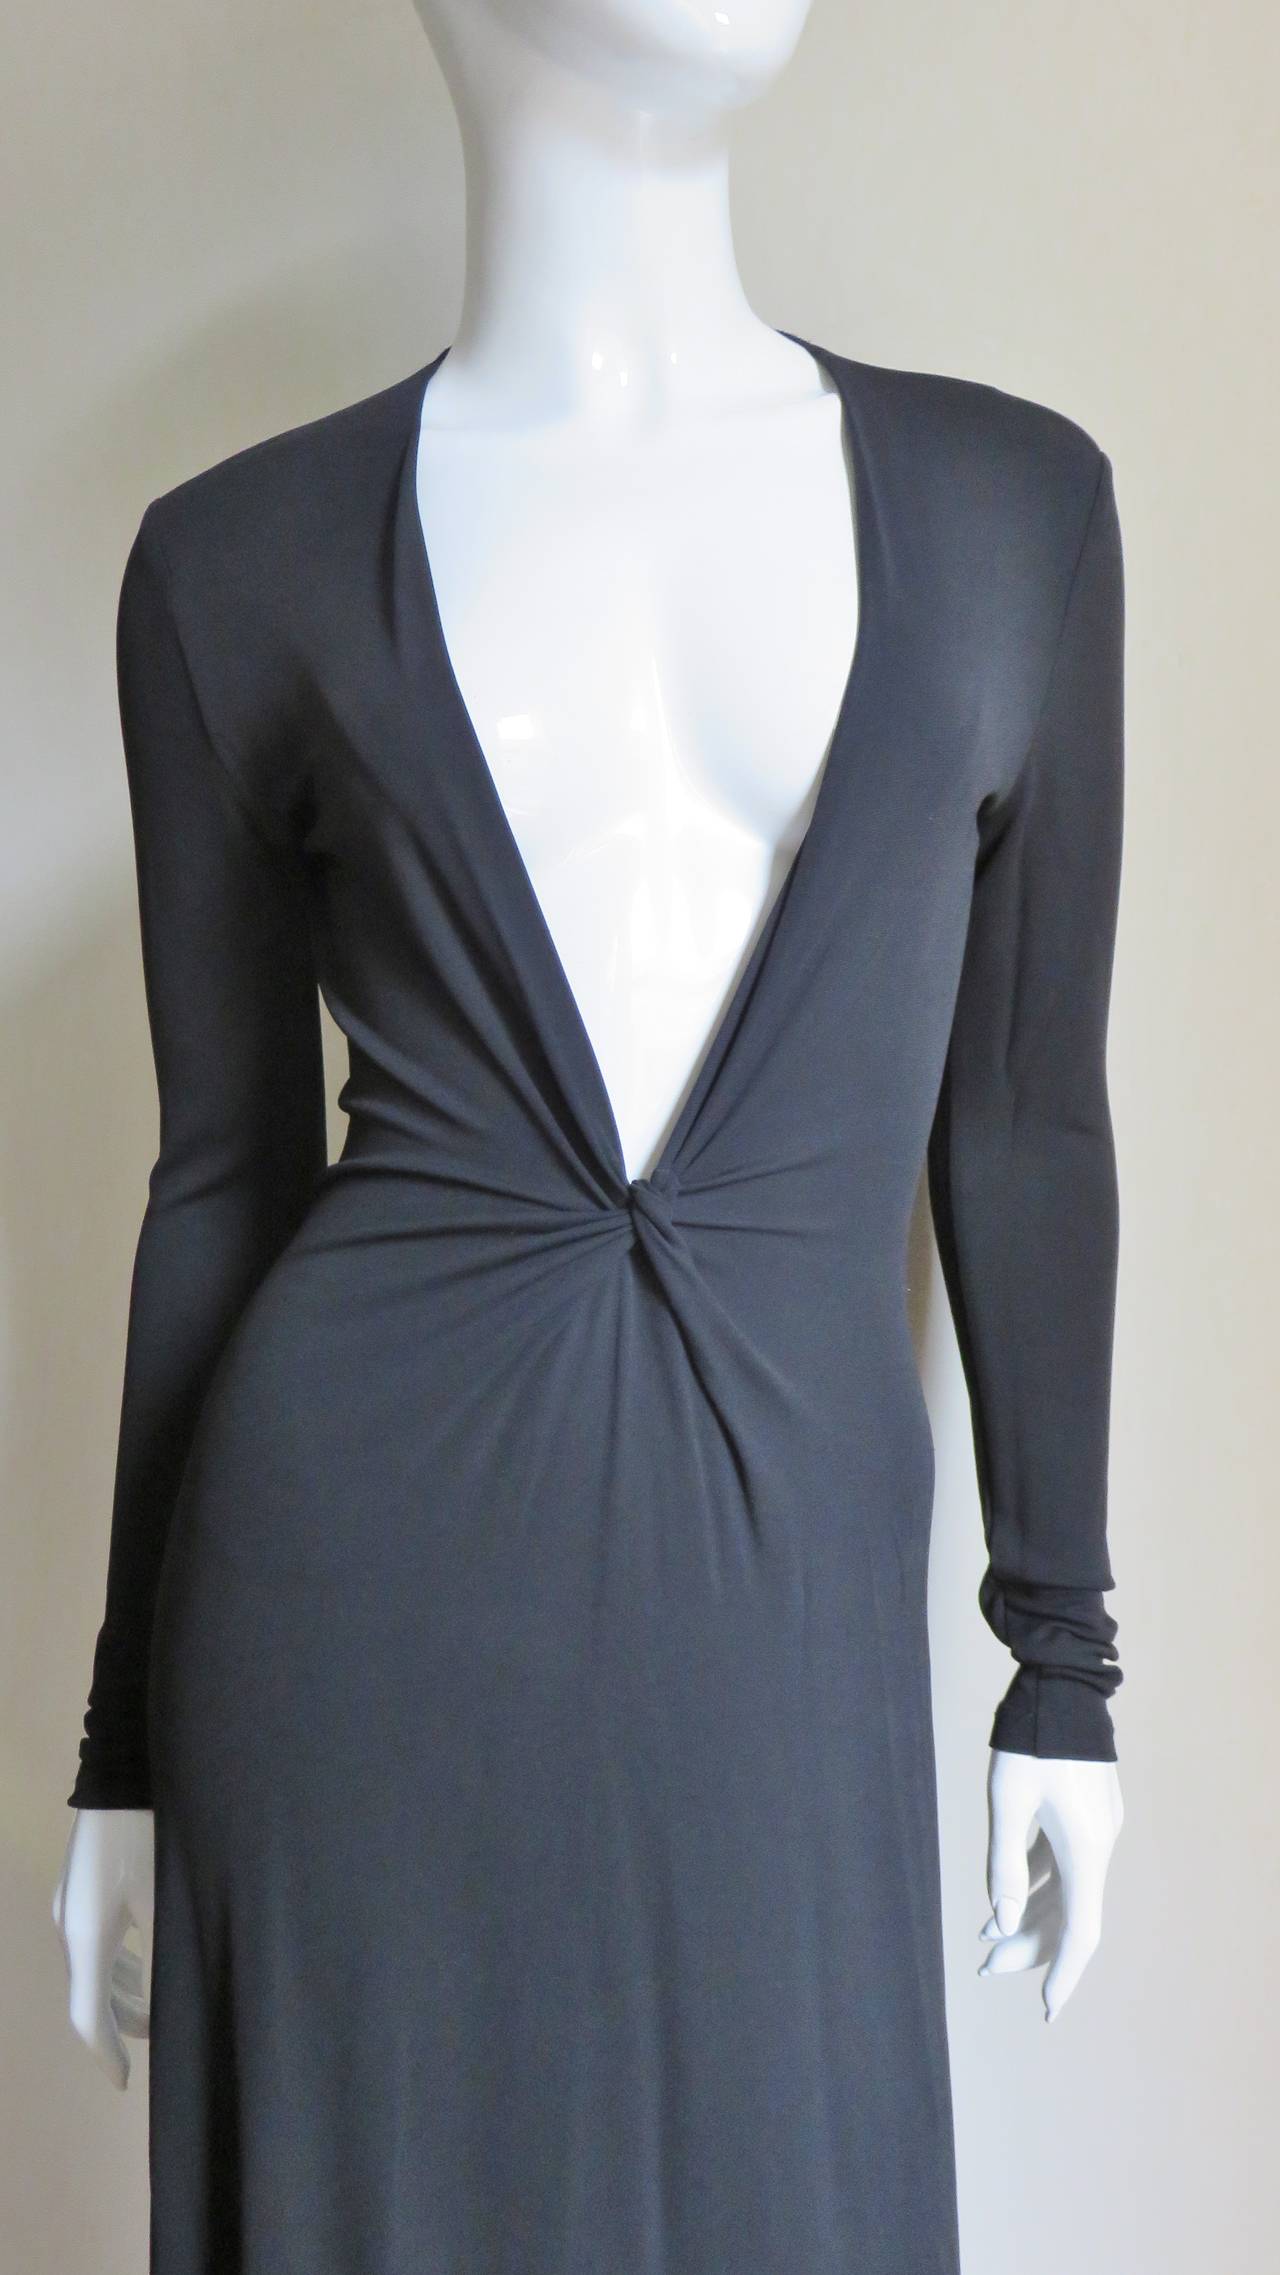 A beautiful rich black silk jersey dress from Celine.  It has a deep plunging neckline, fitted long sleeves and gathering on each side that meet at a knot at the center front waist.  The dress front is cut in one piece with the skirt which flares